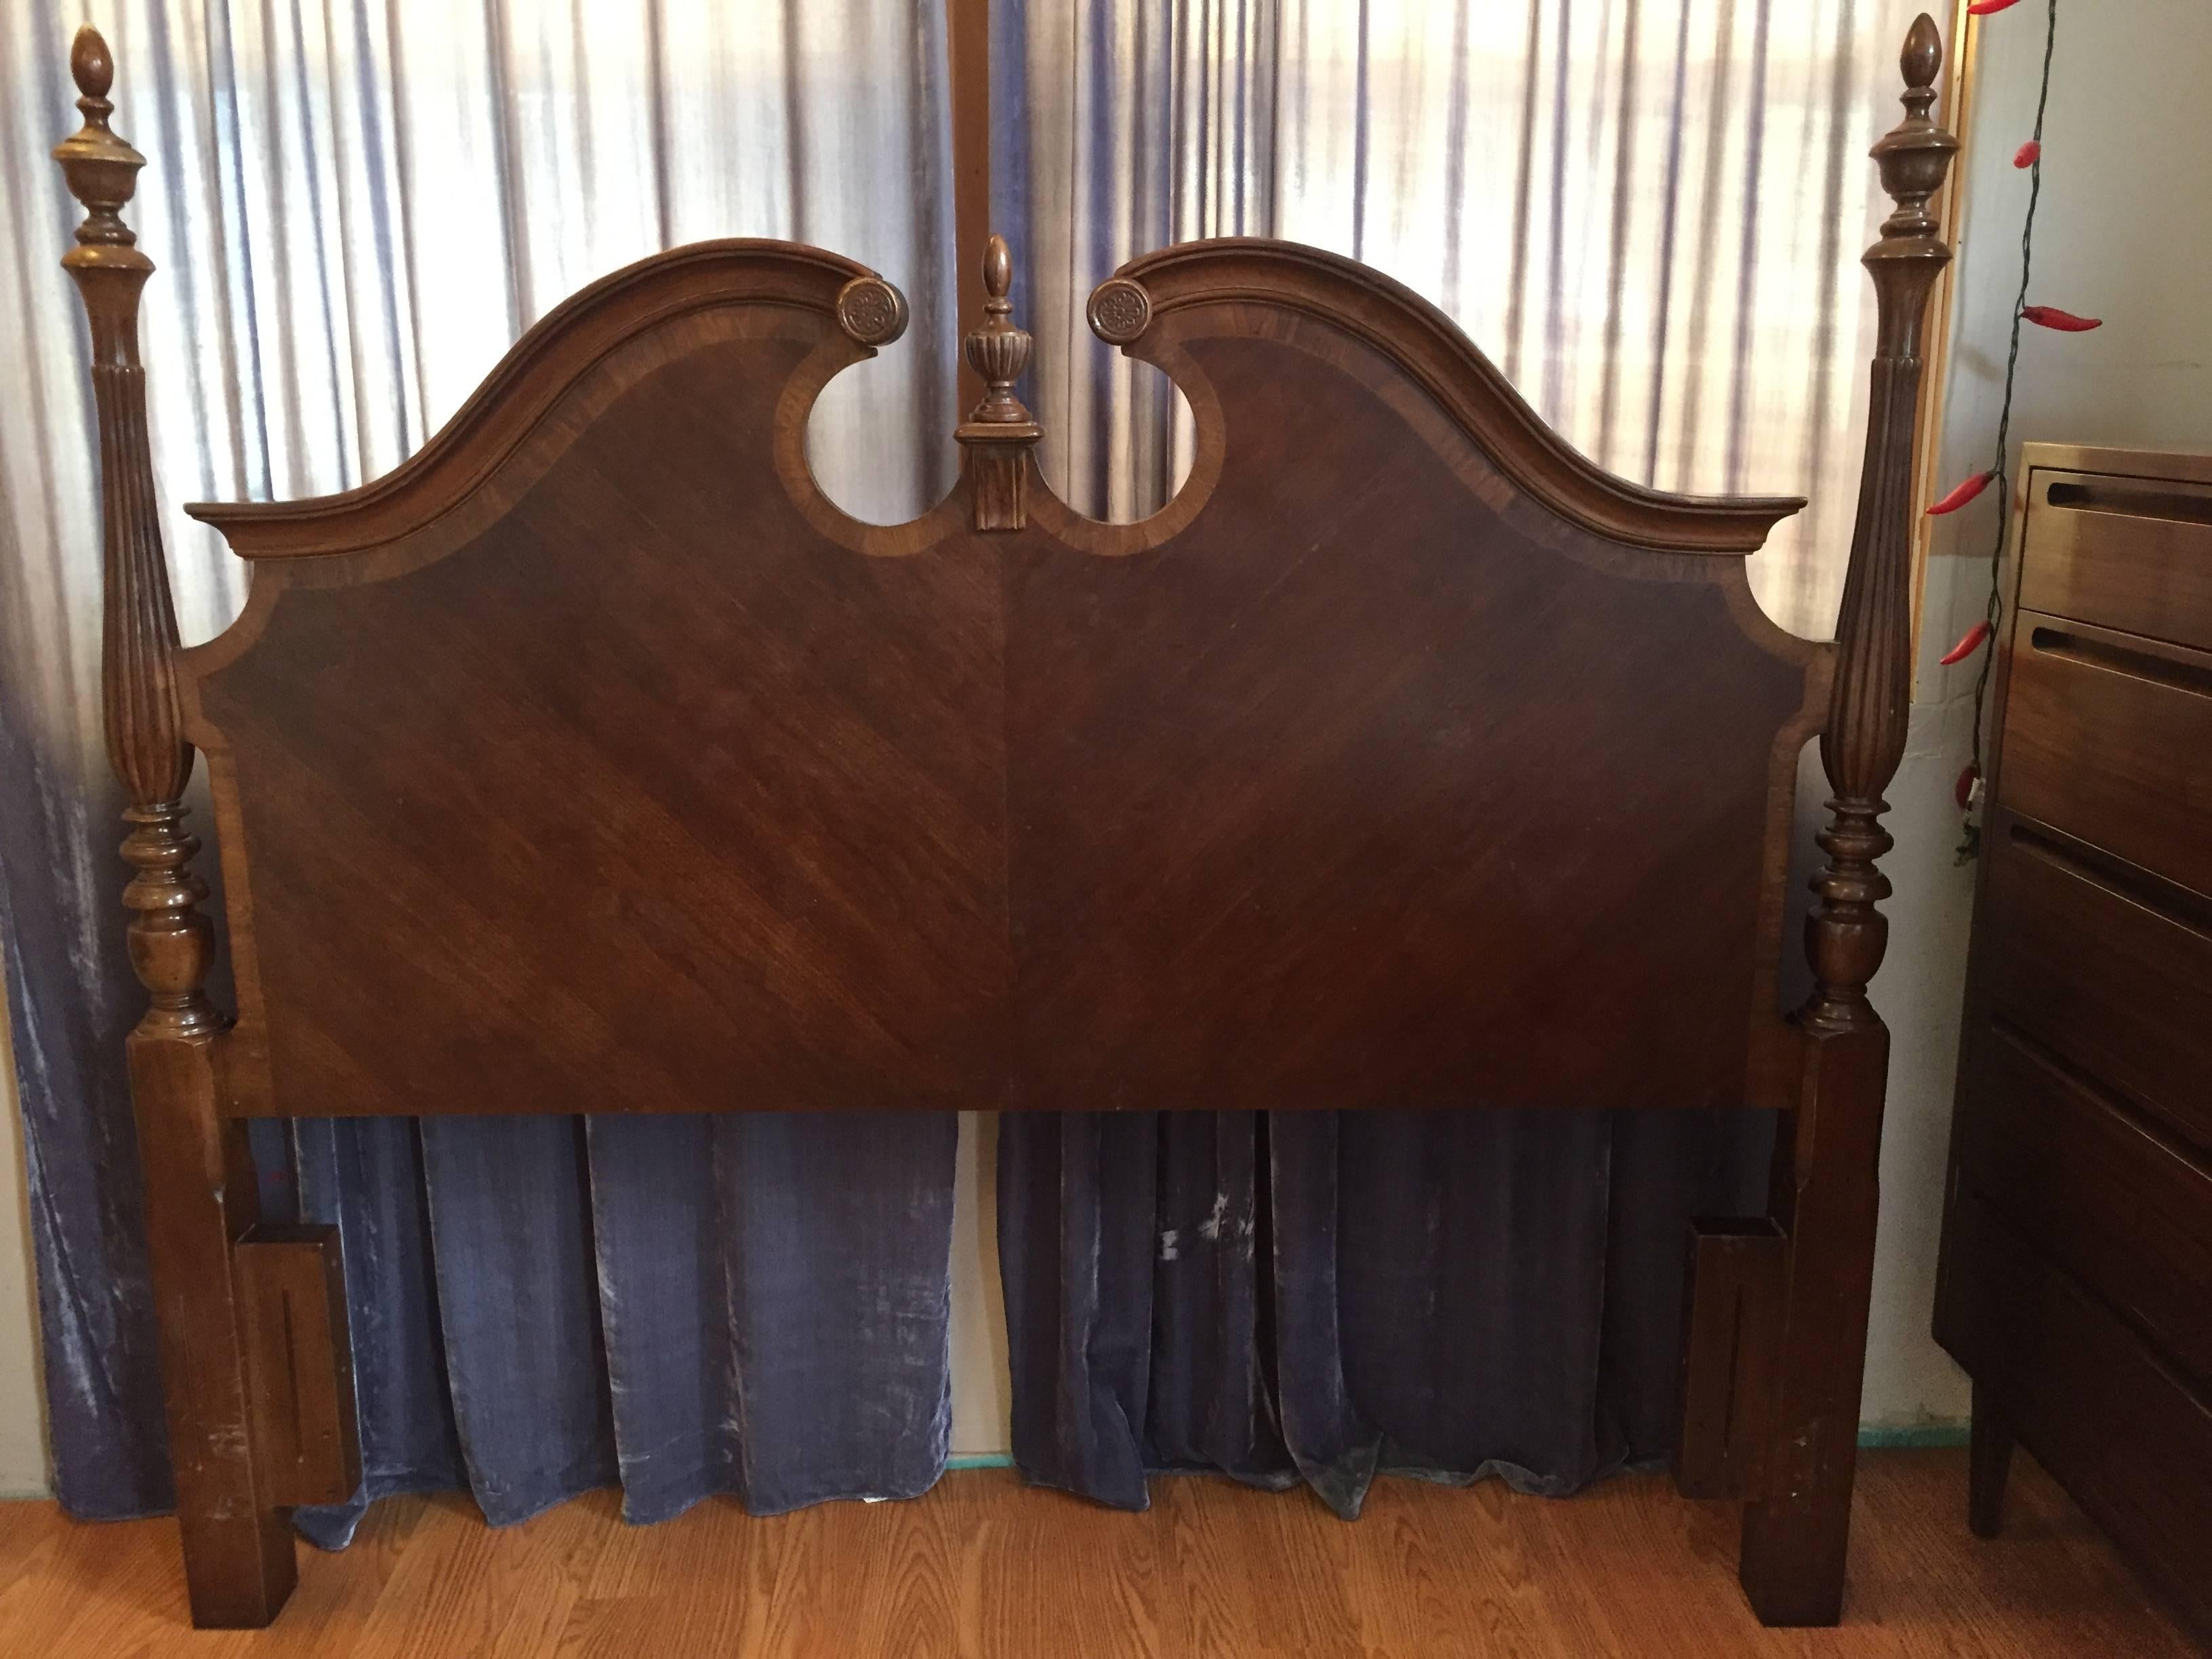 Queen-size bed head board with dual fluted posts and triple finials.